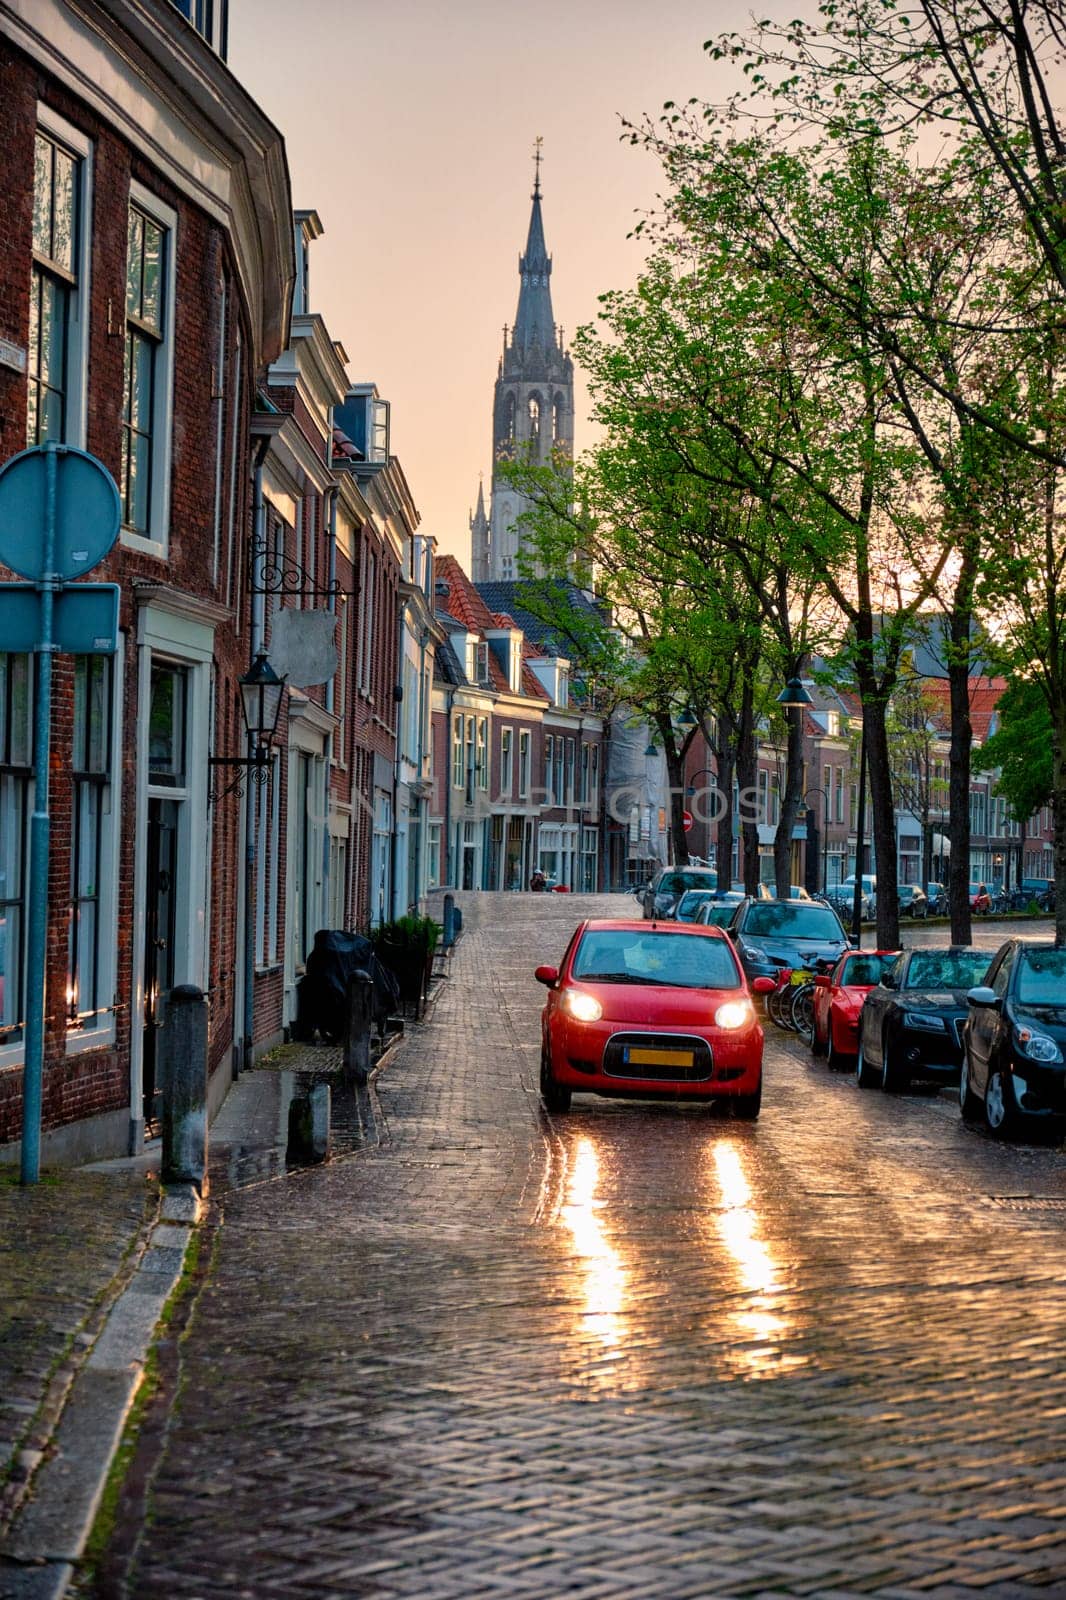 Delft cobblestone street with car in the rain with Nieuwe Kerk church tower in background. Delft, Netherlands